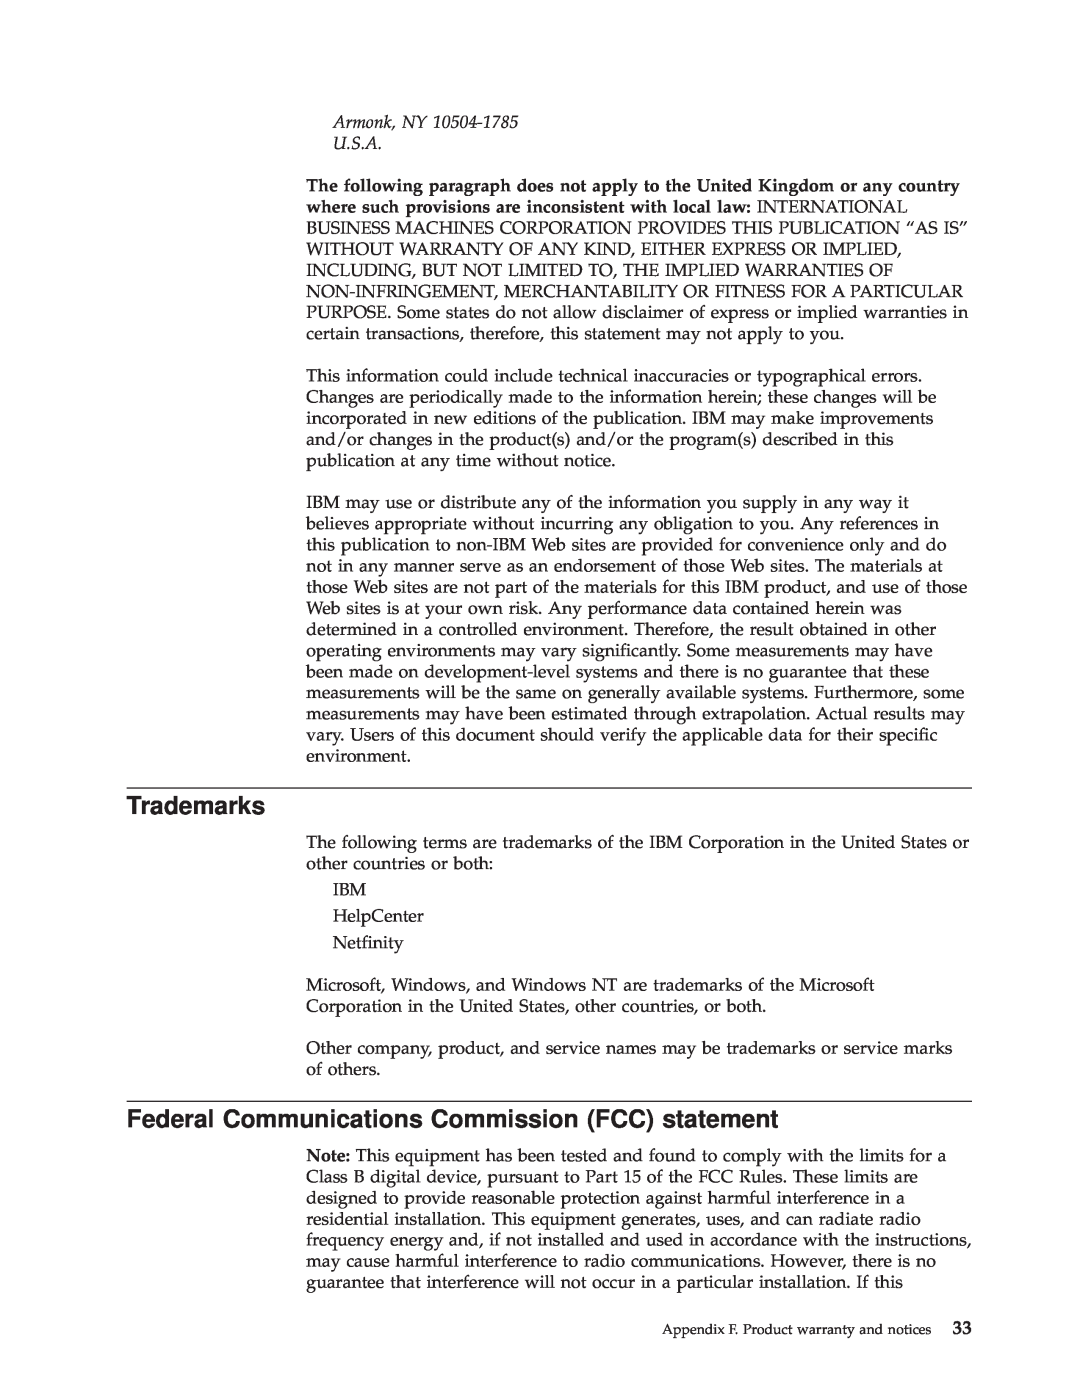 IBM HH LTO manual Trademarks, Federal Communications Commission FCC statement 